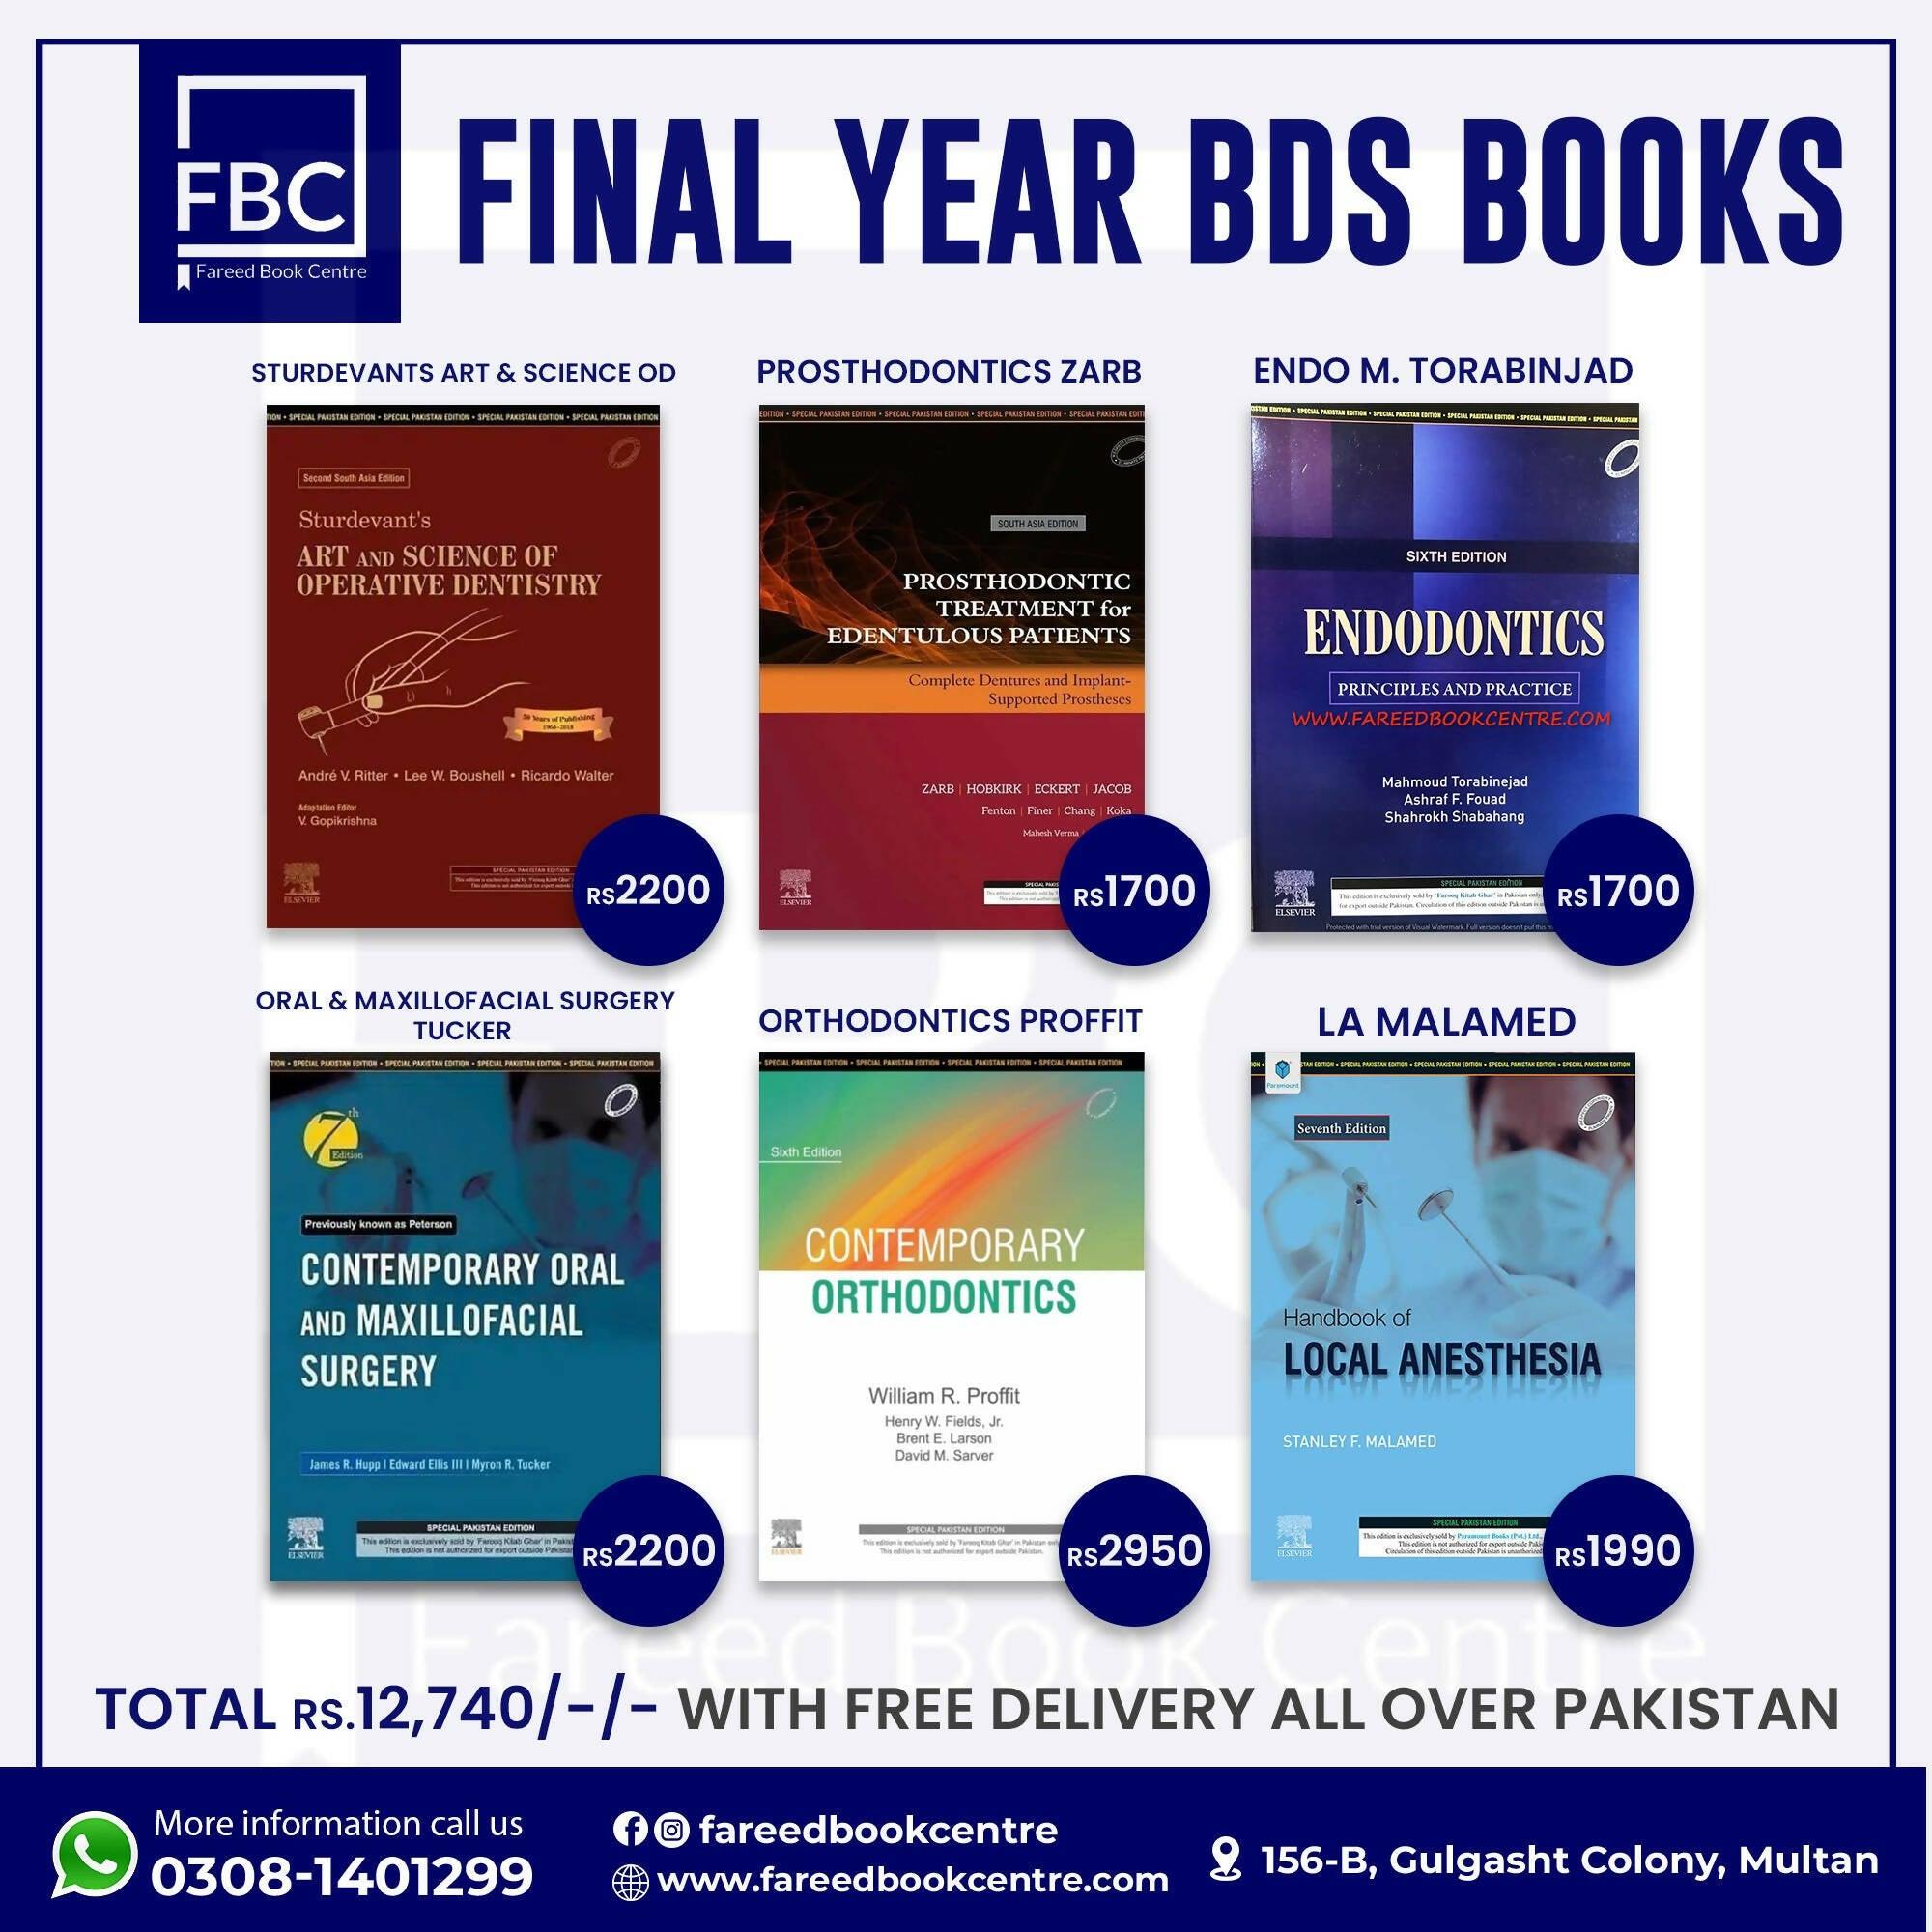 Final Year BDS Books - ValueBox